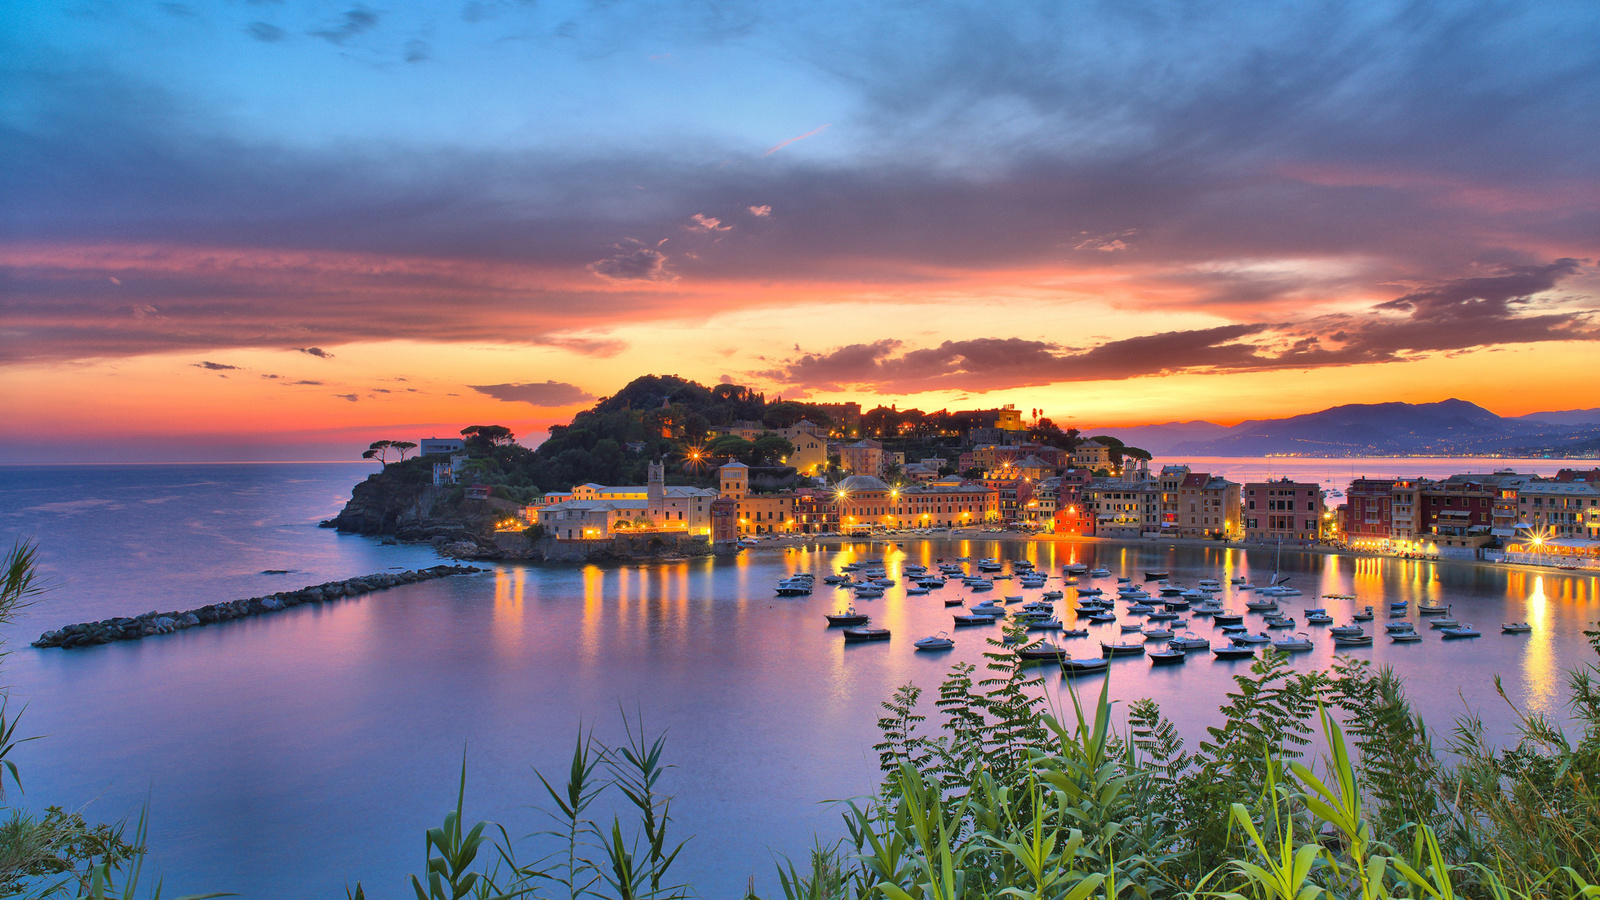 sestri levante, evening, sunset, bay, yachts, bay with boats, liguria, italy